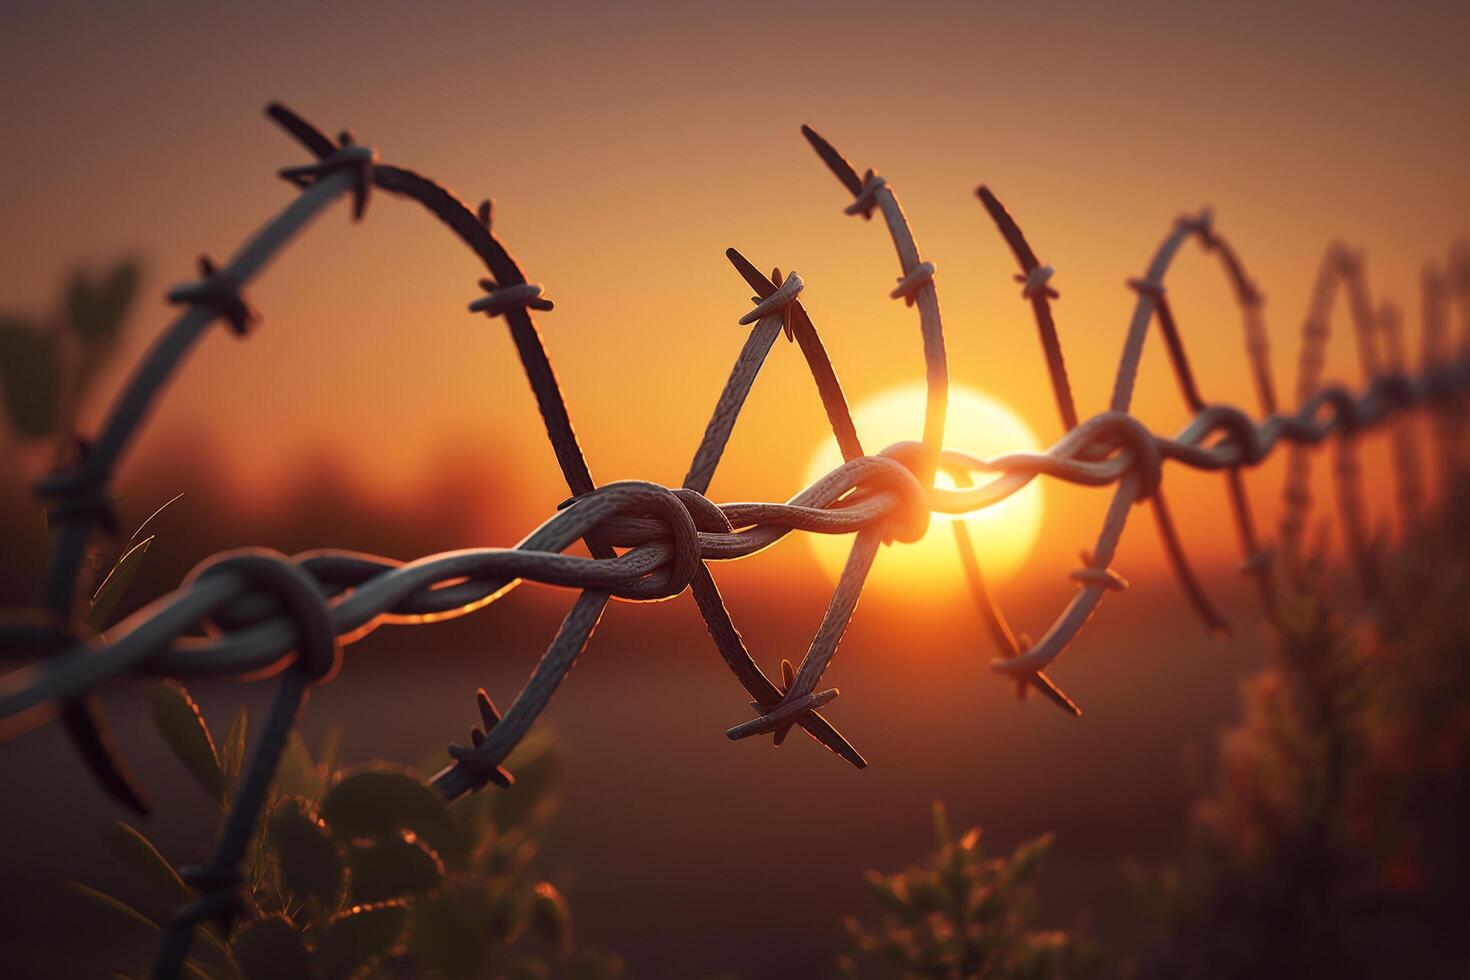 The sun is setting behind a barbed wire fence, photo